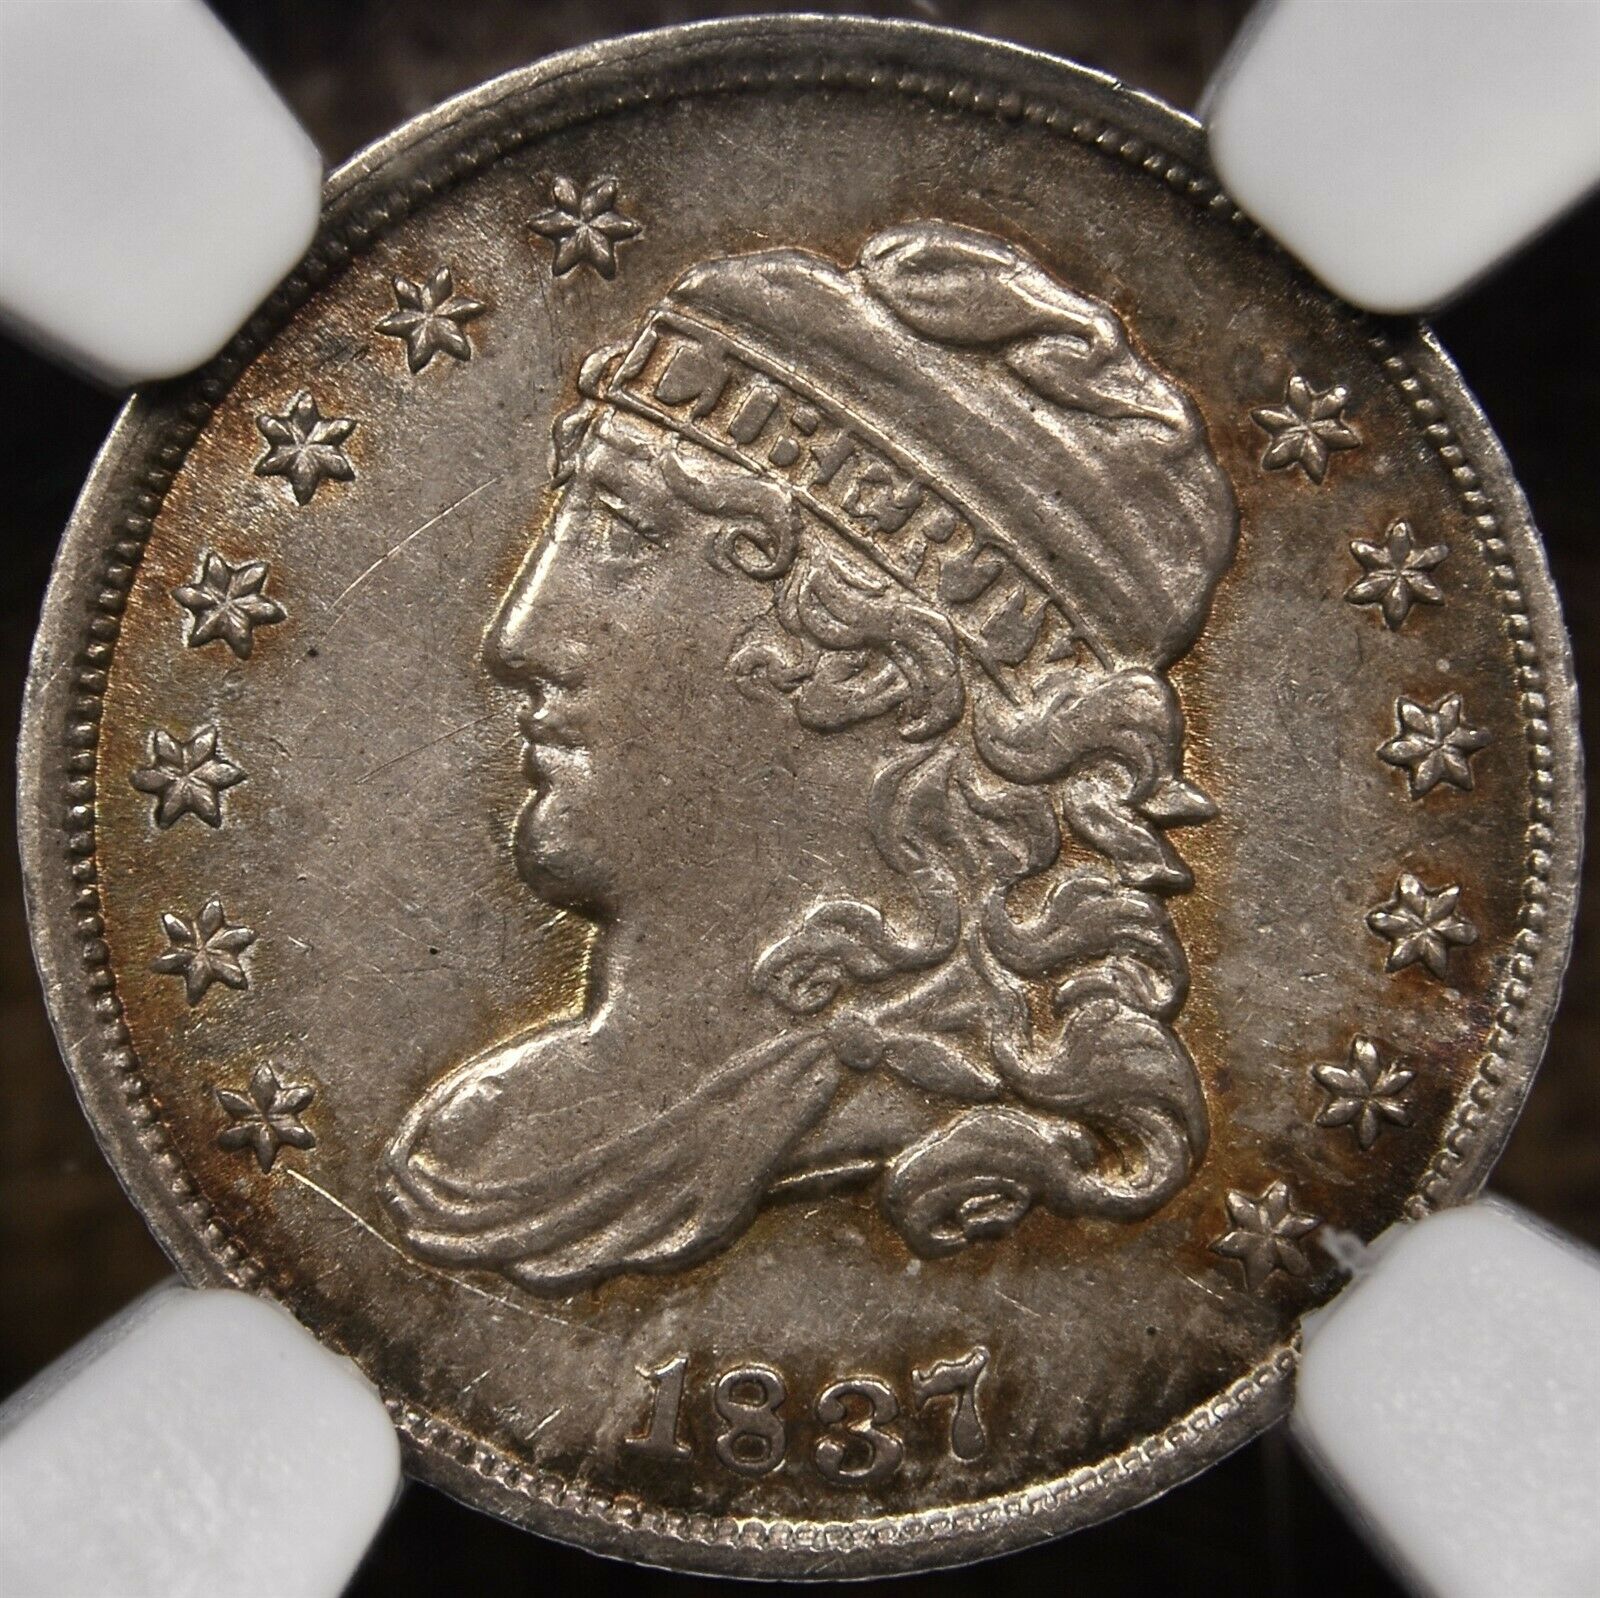 1837 Lm.4 Small 5 Capped Bust Half Dime, Ngc Ms61, Very Tough!davidkahnrarecoins